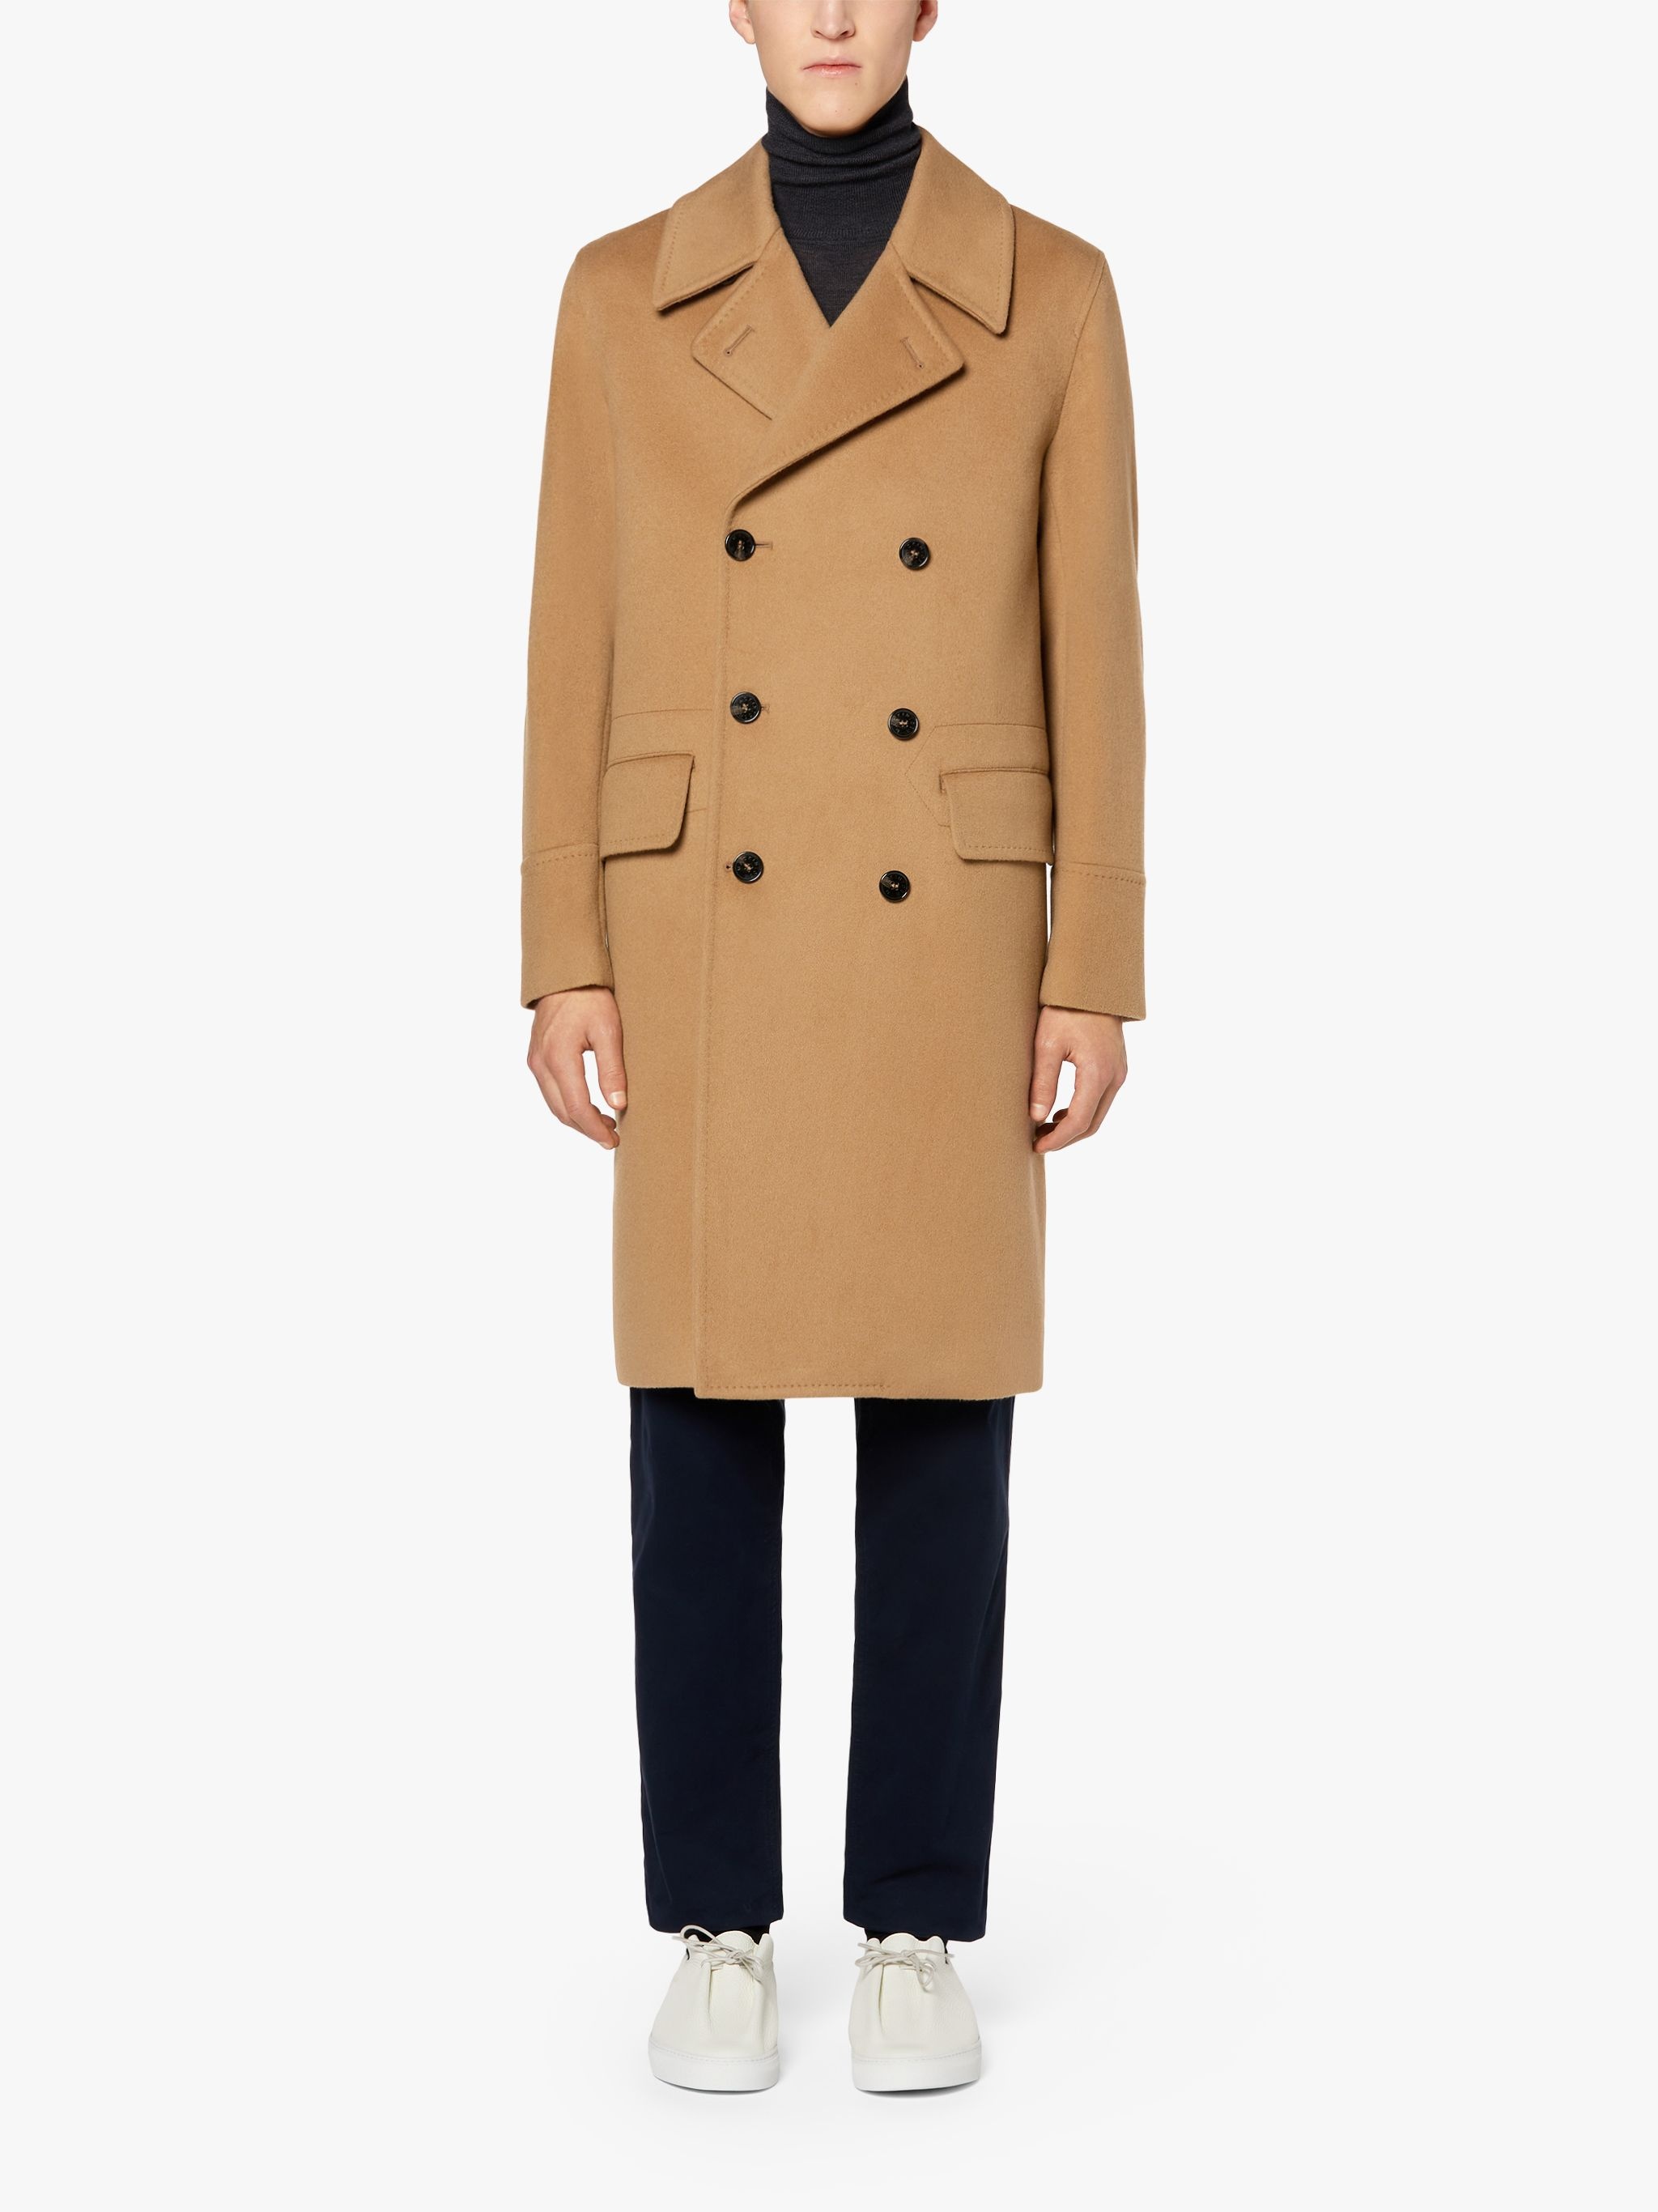 REDFORD BEIGE WOOL & CASHMERE DOUBLE BREASTED COAT | GM-1101 - 2